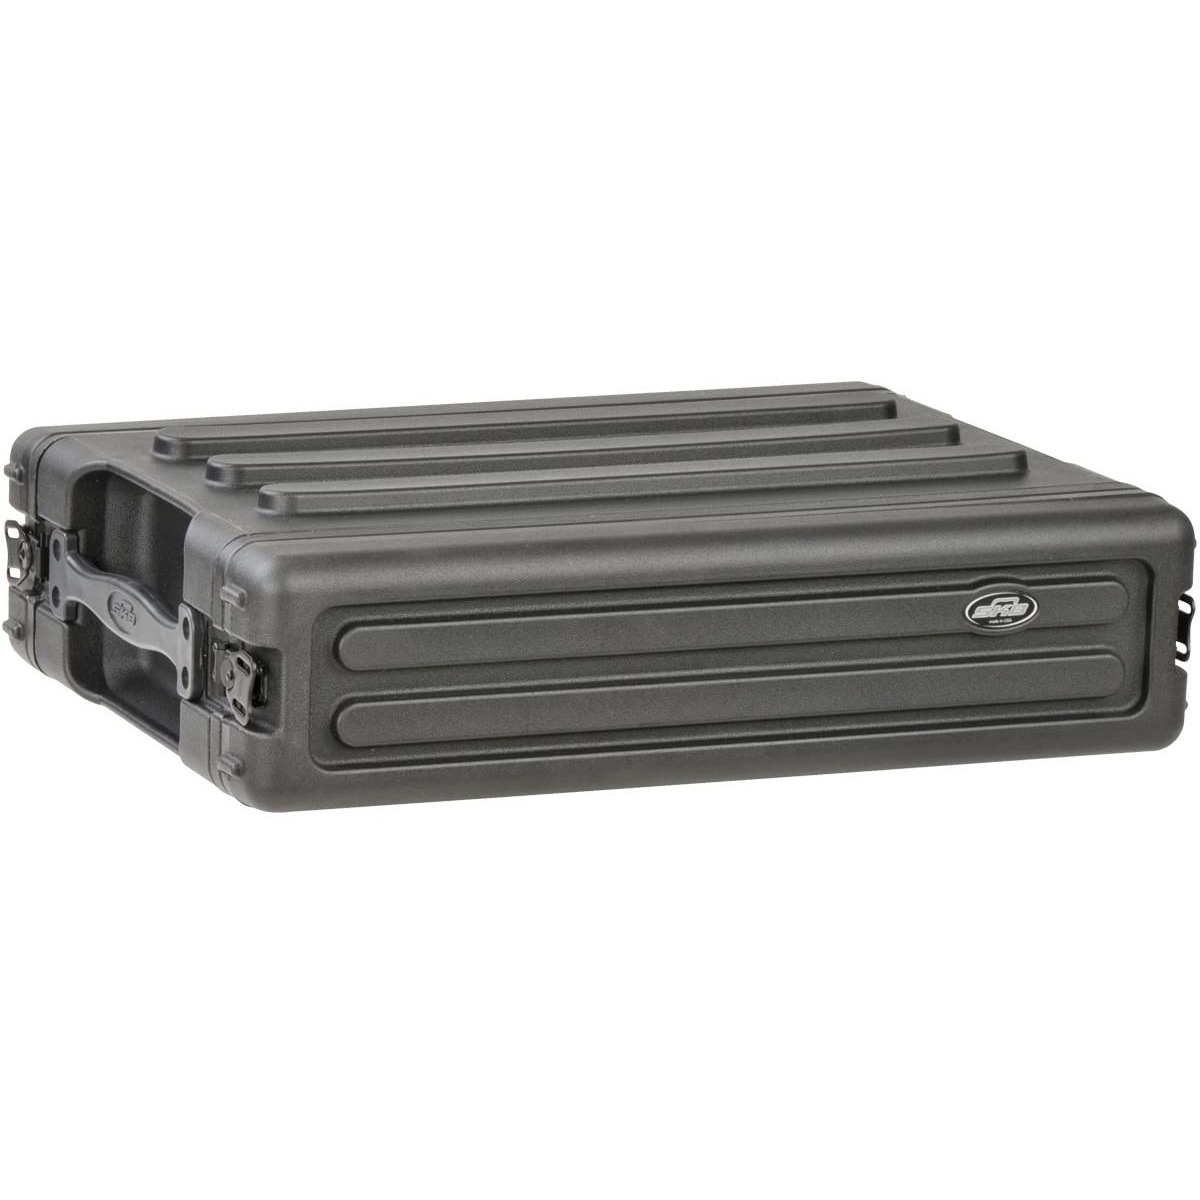 SKB 2U Roto Shallow Rack Case with Steel Rails Questions & Answers